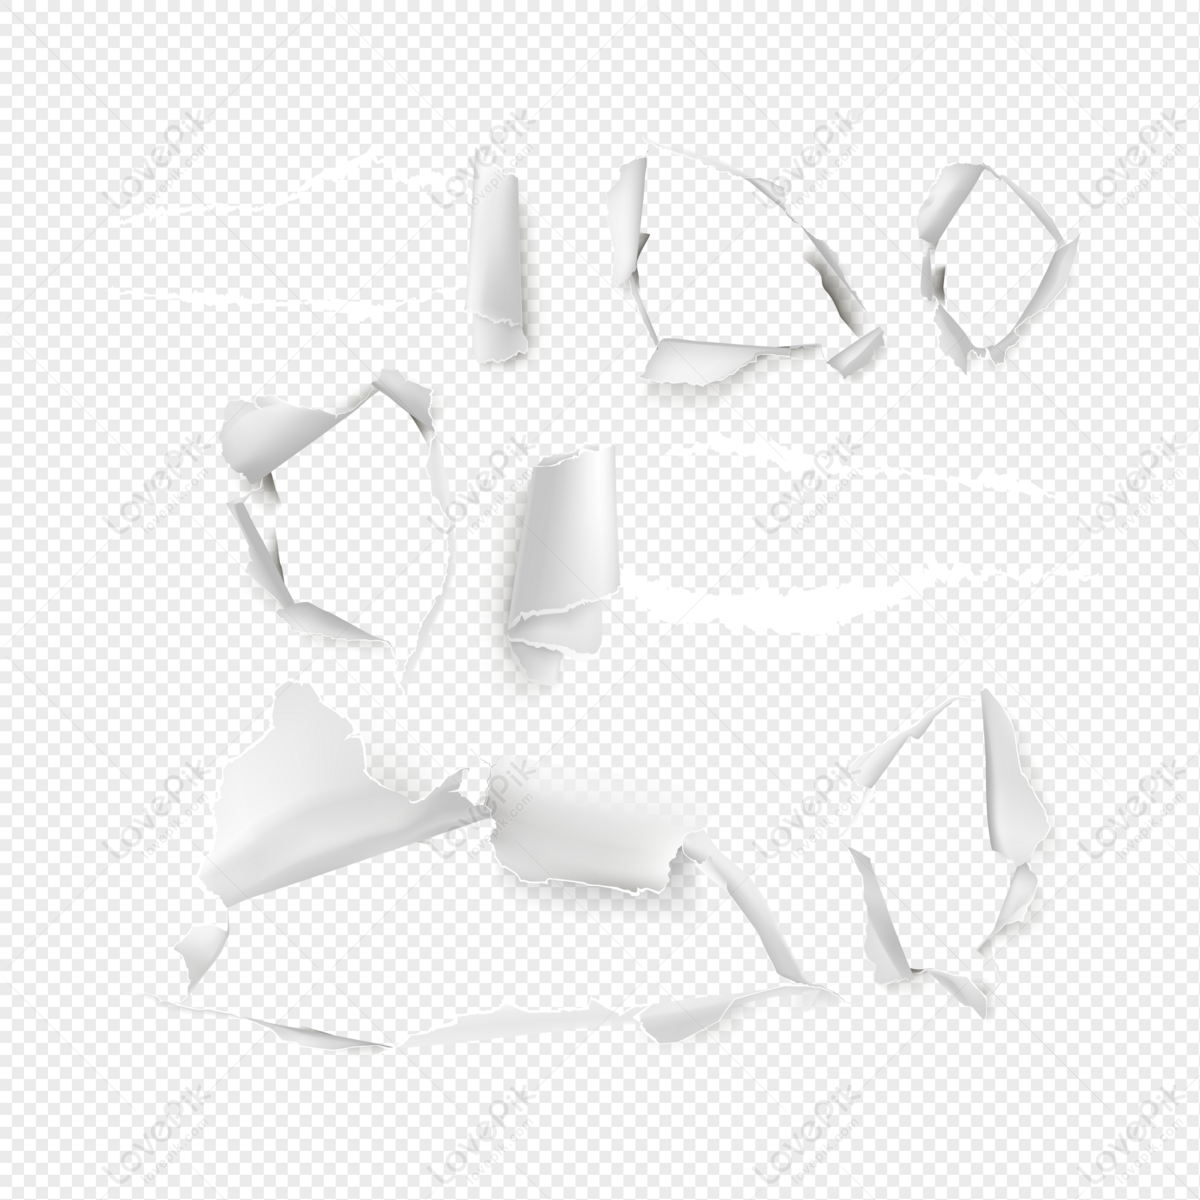 Ripped Paper Psd Download - Psd Torn Paper Effect Png, clipart